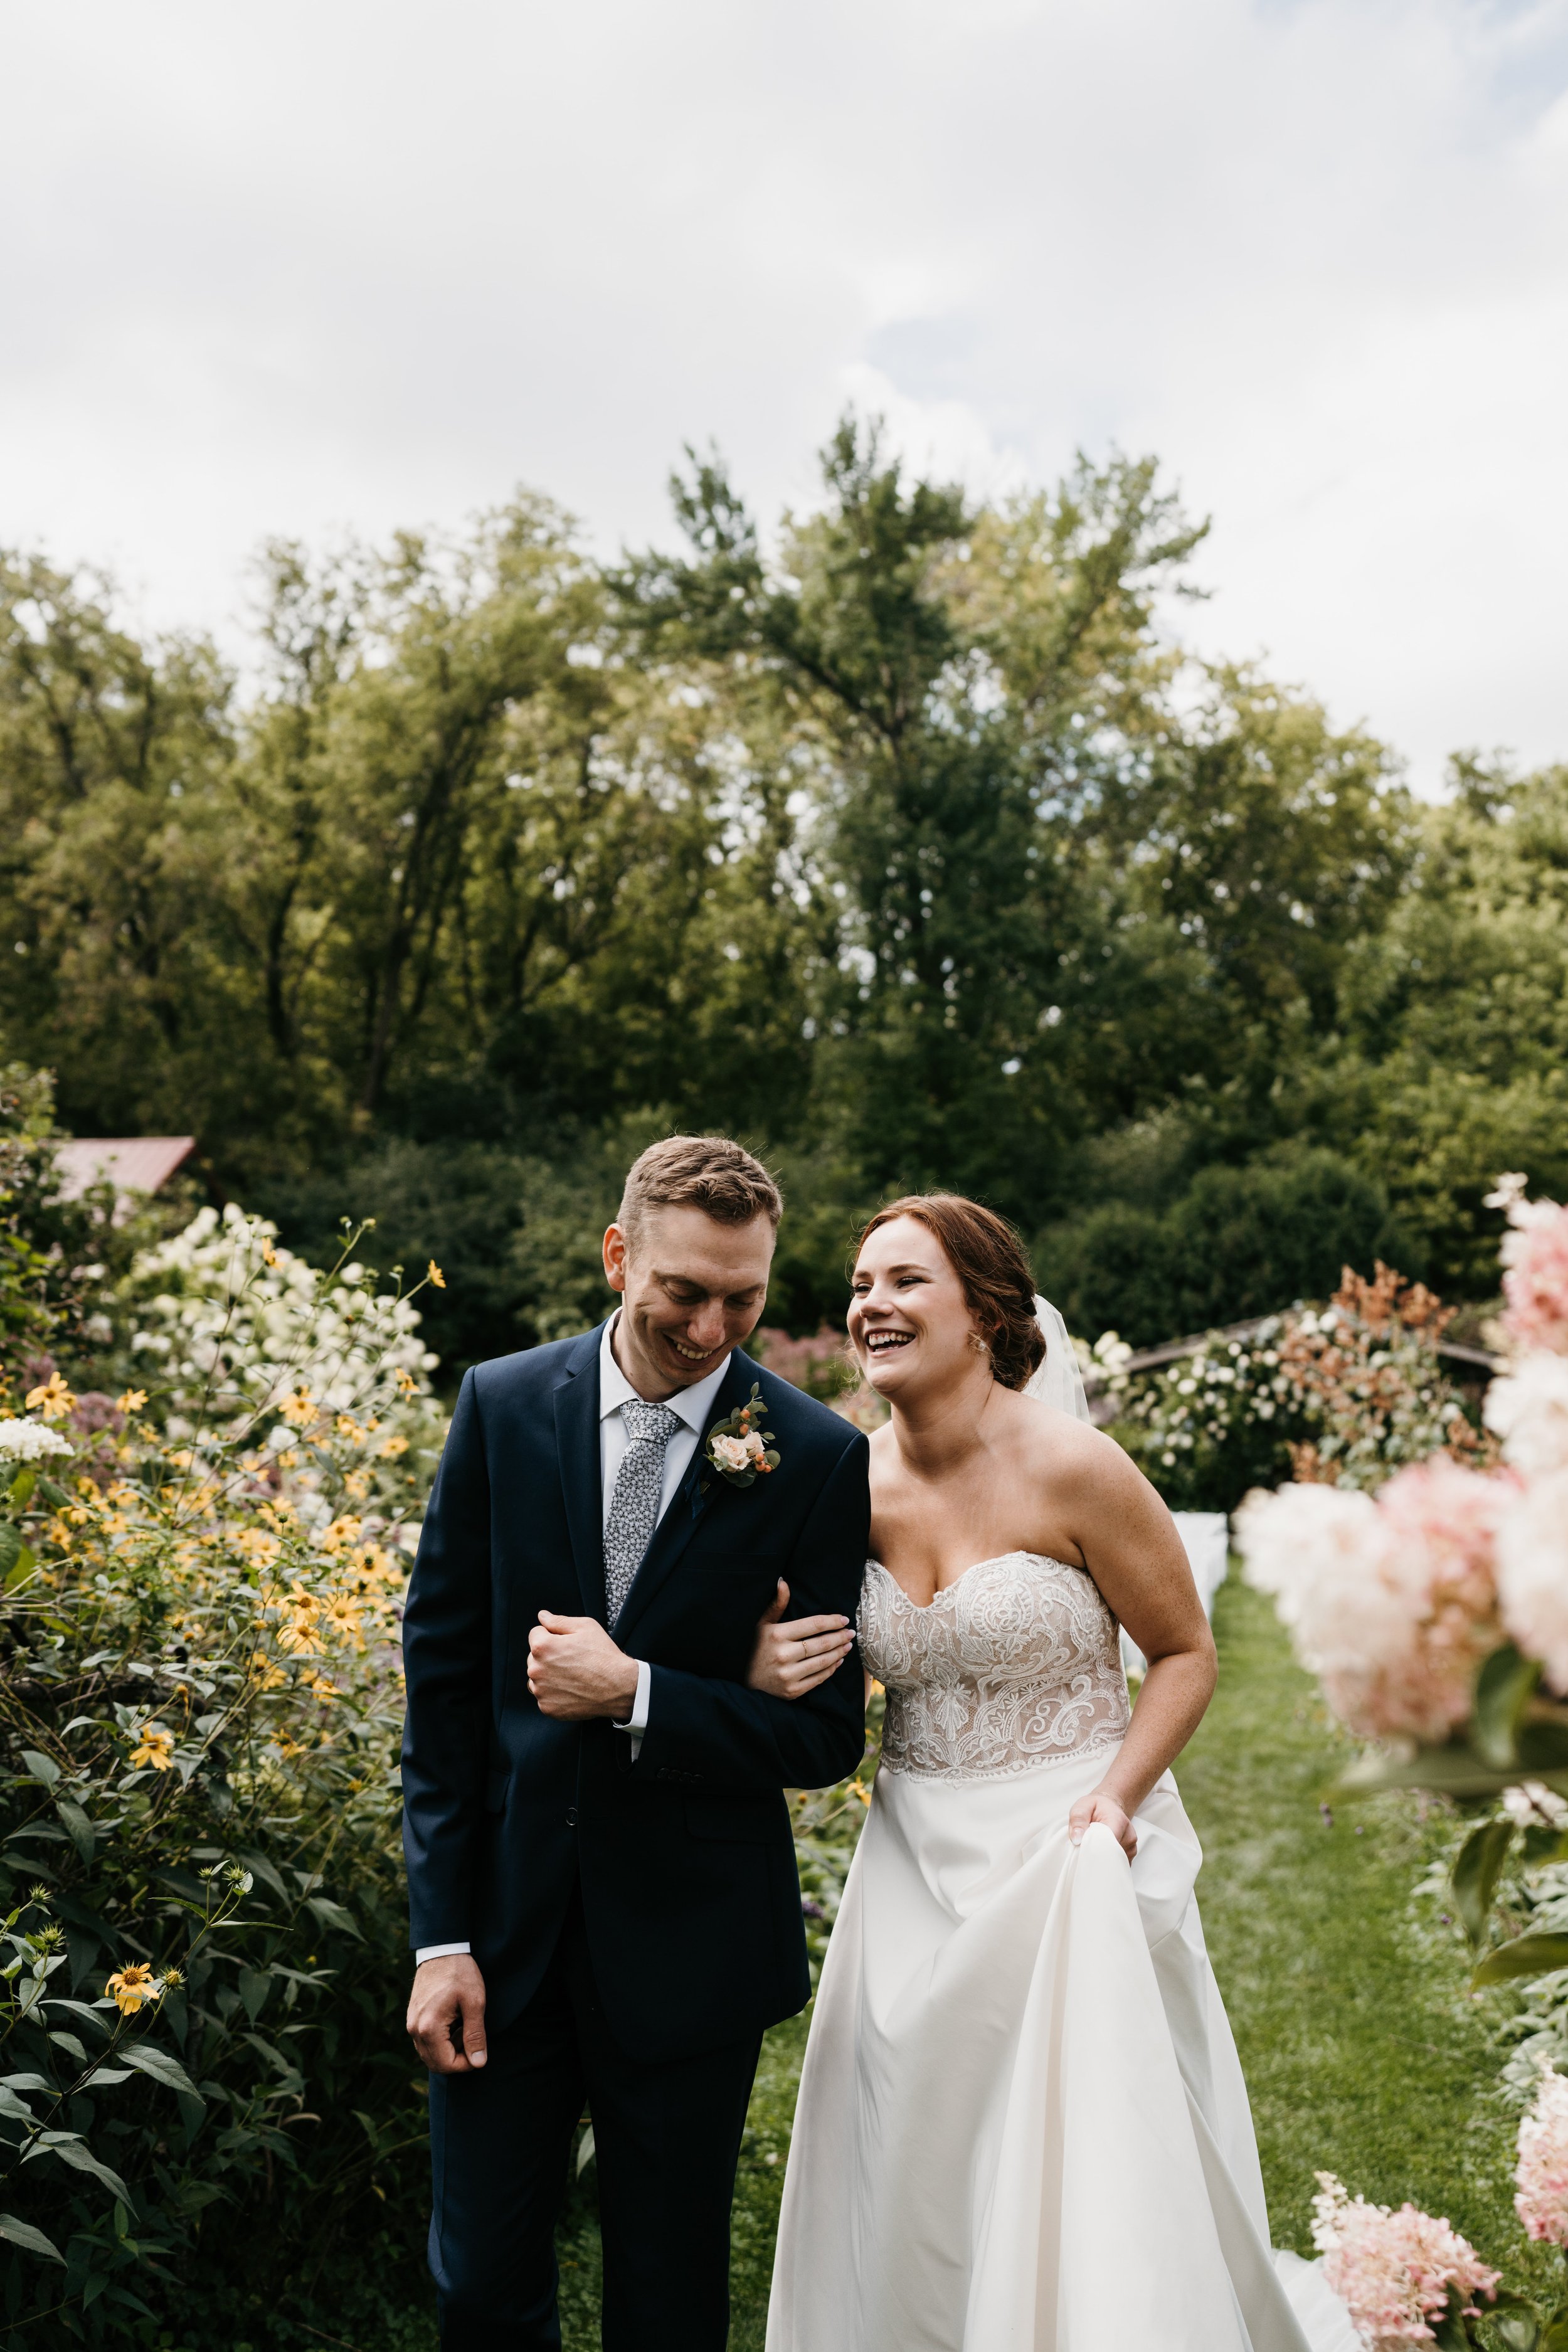  “When we hired HappiLily, we knew we would be getting some great help with our wedding, but we had no idea just how helpful and essential Lily &amp; team would be to us!   Lily is incredible at her job. She is very organized and knows what questions